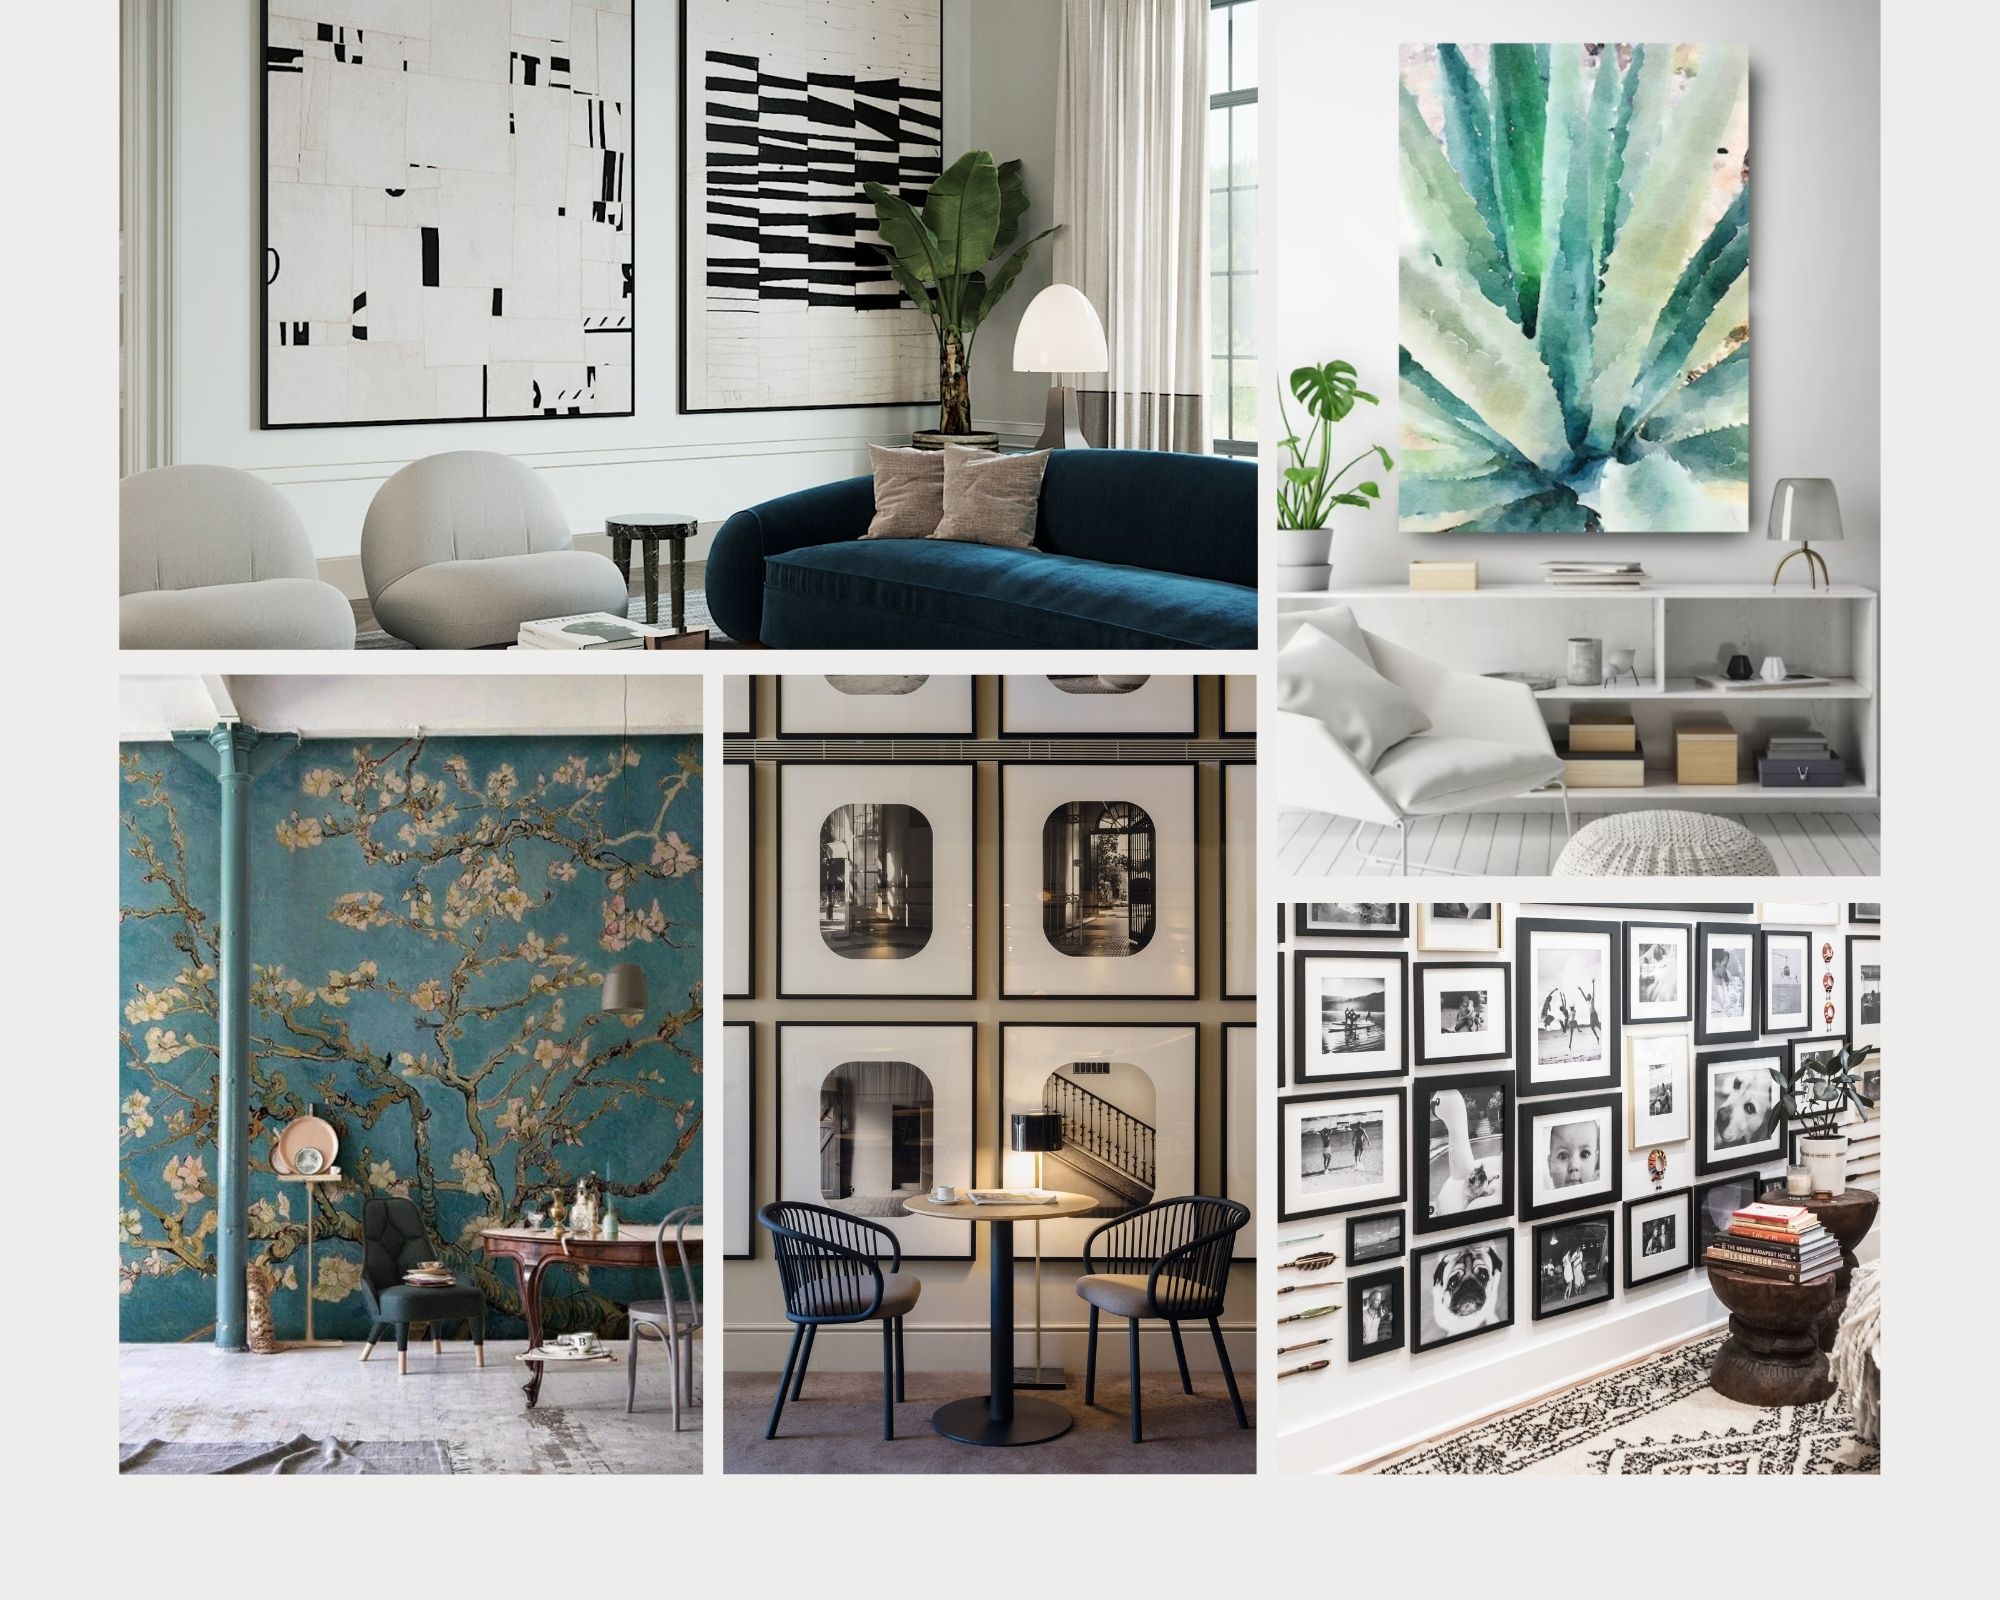 10 ways to display art in your home - Homes and Antiques